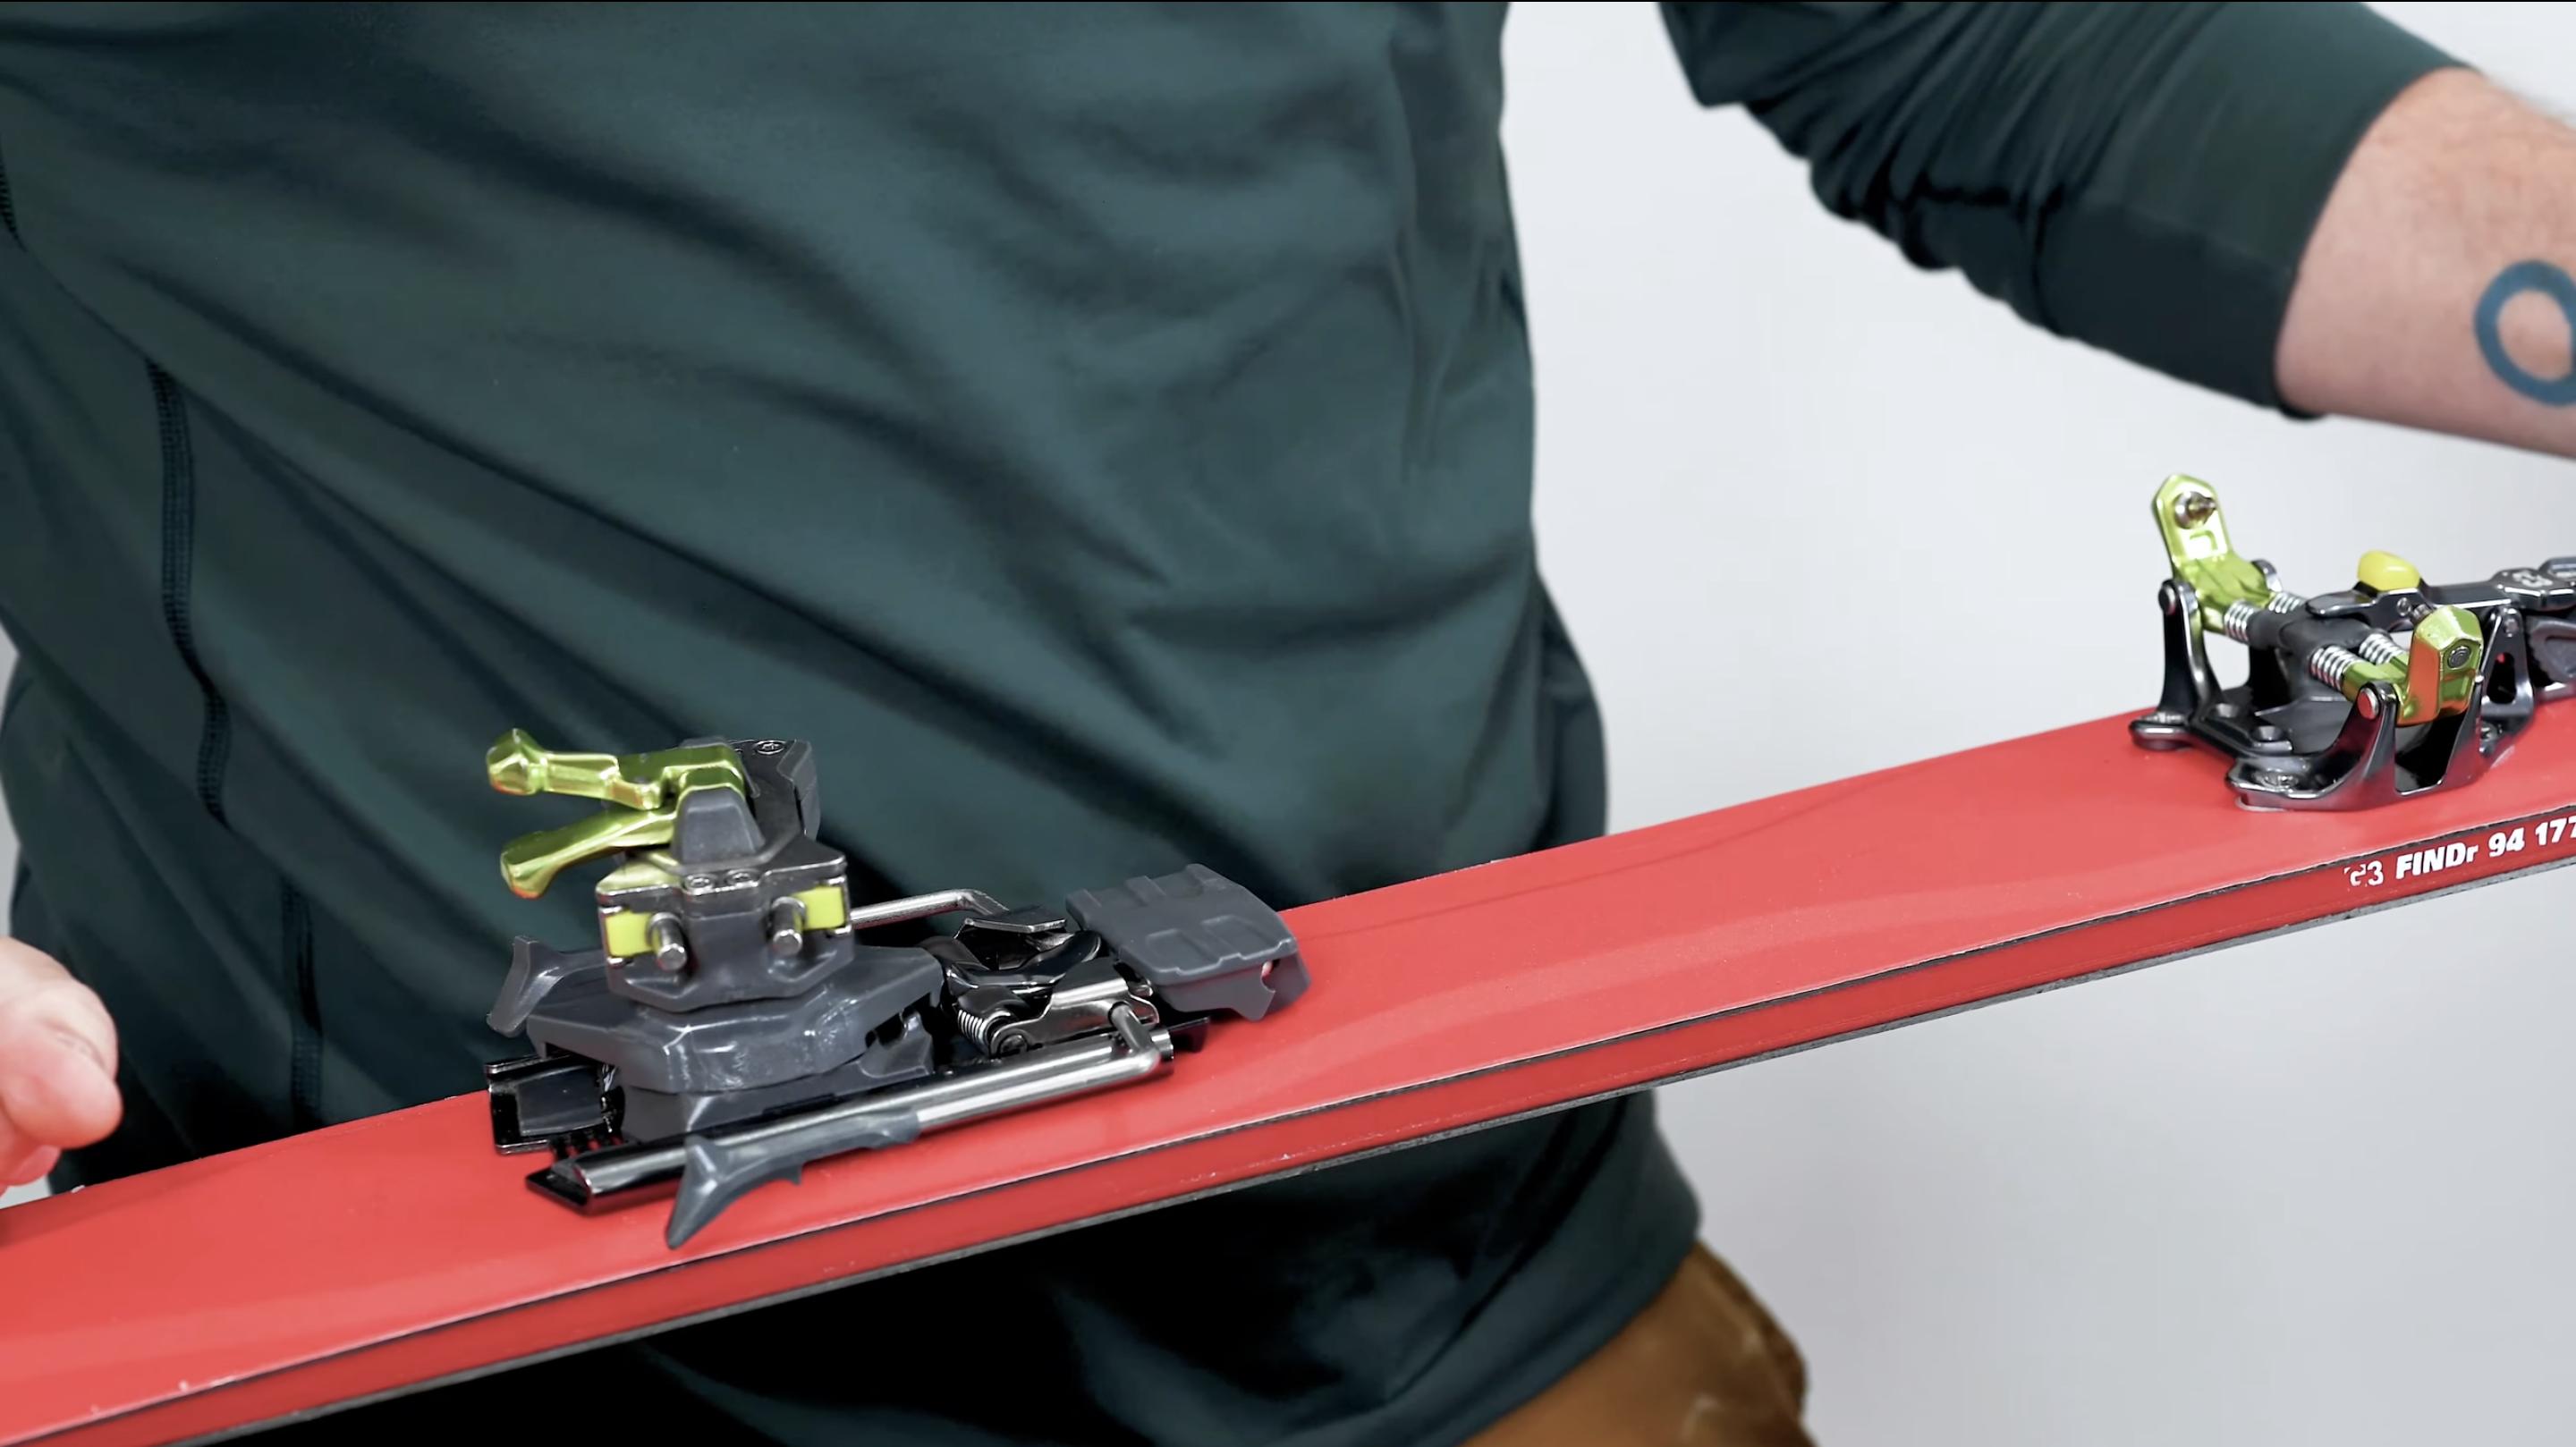 ZED Bindings & Brakes - Transition From Ski To Tour